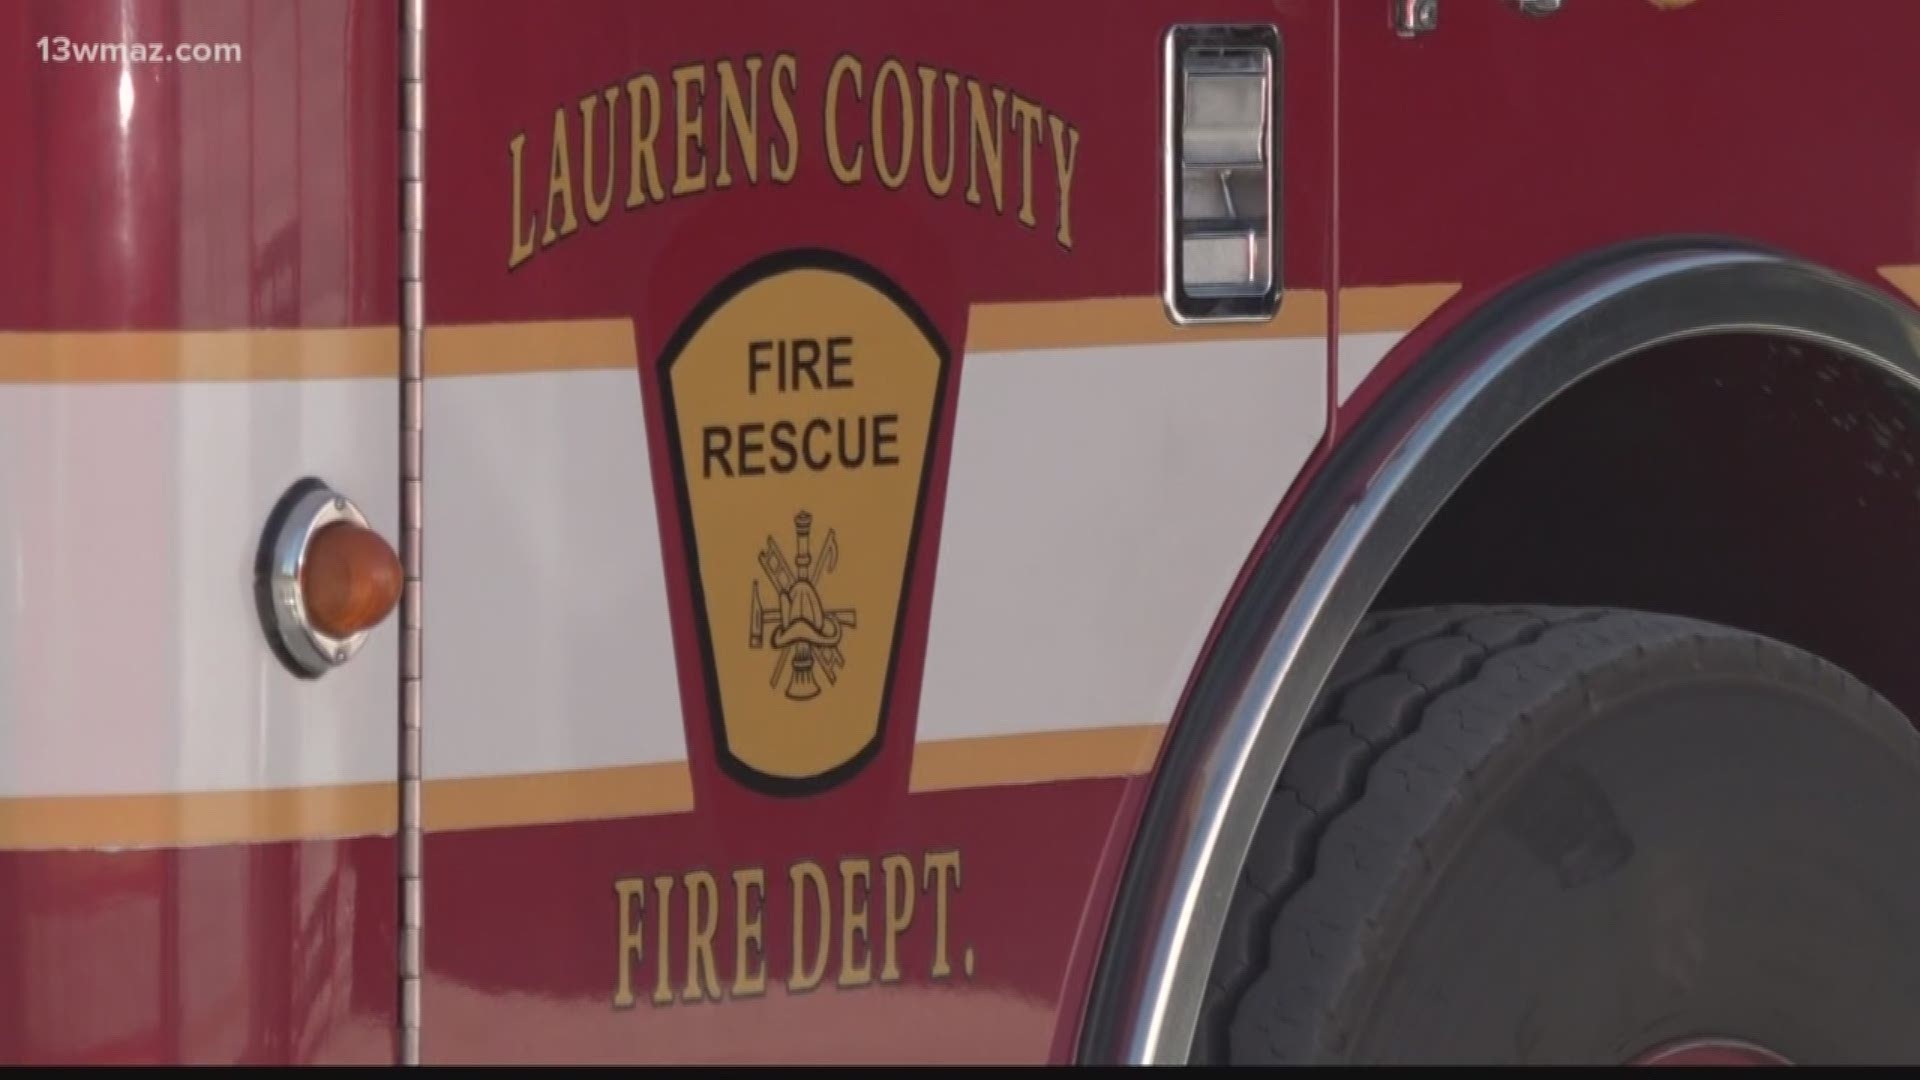 The Laurens County Fire Department needs volunteers. A group training was held Saturday to get the current candidates ready.